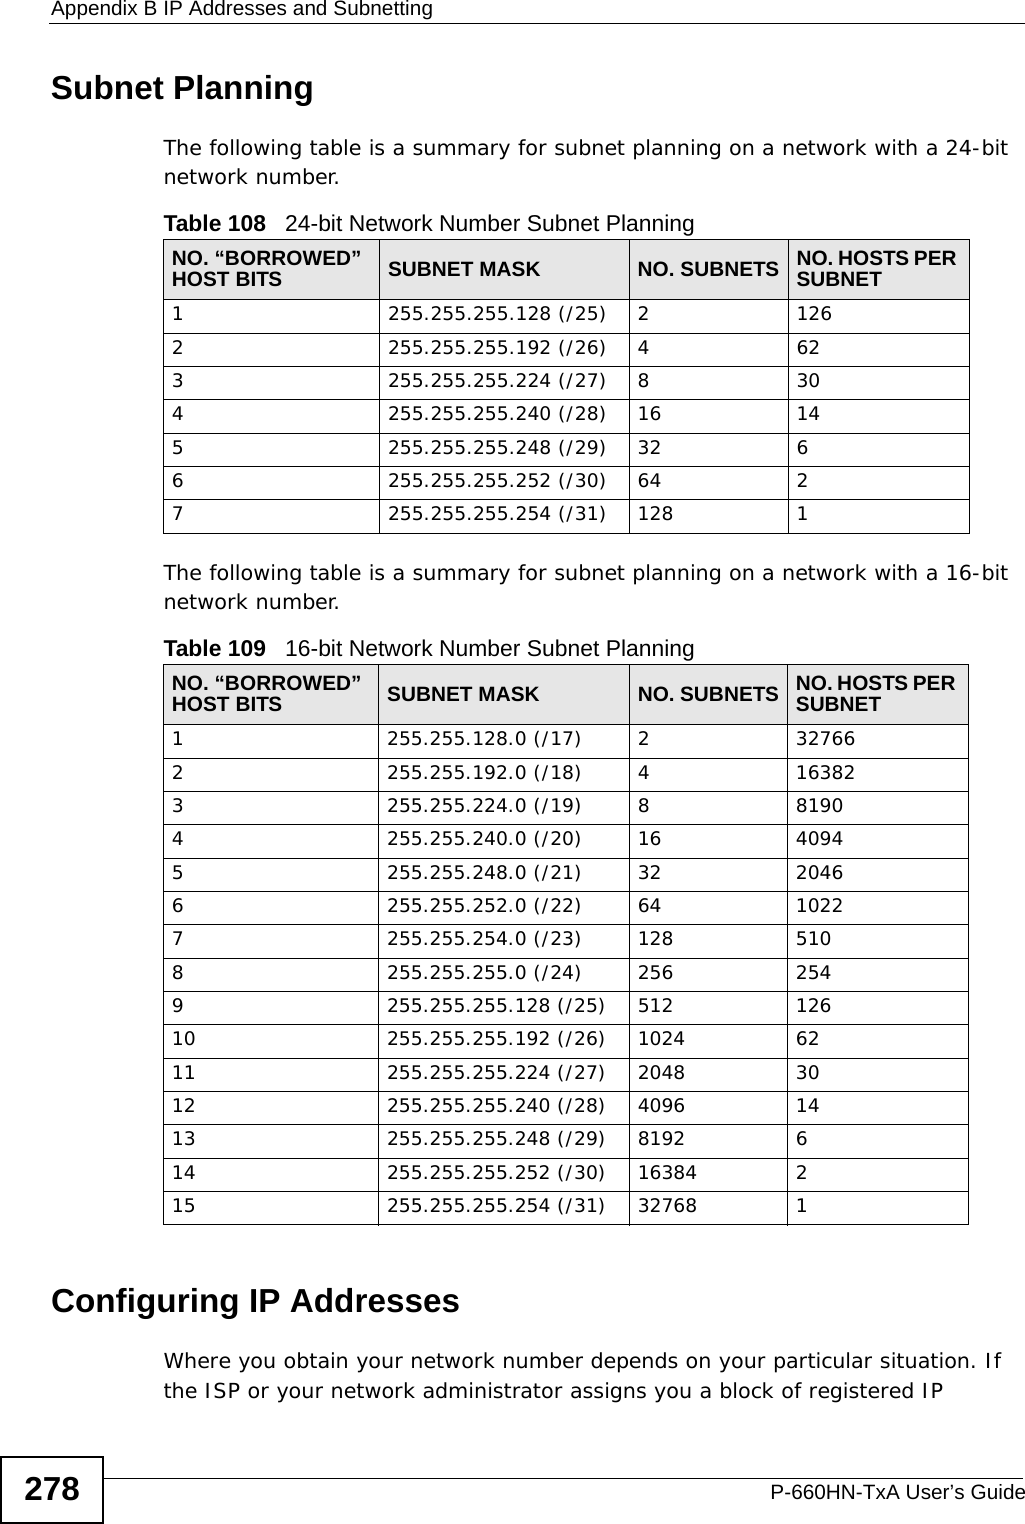 Appendix B IP Addresses and SubnettingP-660HN-TxA User’s Guide278Subnet PlanningThe following table is a summary for subnet planning on a network with a 24-bit network number.The following table is a summary for subnet planning on a network with a 16-bit network number. Configuring IP AddressesWhere you obtain your network number depends on your particular situation. If the ISP or your network administrator assigns you a block of registered IP Table 108   24-bit Network Number Subnet PlanningNO. “BORROWED” HOST BITS SUBNET MASK NO. SUBNETS NO. HOSTS PER SUBNET1255.255.255.128 (/25) 21262255.255.255.192 (/26) 4623255.255.255.224 (/27) 8304255.255.255.240 (/28) 16 145255.255.255.248 (/29) 32 66255.255.255.252 (/30) 64 27255.255.255.254 (/31) 128 1Table 109   16-bit Network Number Subnet PlanningNO. “BORROWED” HOST BITS SUBNET MASK NO. SUBNETS NO. HOSTS PER SUBNET1255.255.128.0 (/17) 2327662255.255.192.0 (/18) 4163823255.255.224.0 (/19) 881904255.255.240.0 (/20) 16 40945255.255.248.0 (/21) 32 20466255.255.252.0 (/22) 64 10227255.255.254.0 (/23) 128 5108255.255.255.0 (/24) 256 2549255.255.255.128 (/25) 512 12610 255.255.255.192 (/26) 1024 6211 255.255.255.224 (/27) 2048 3012 255.255.255.240 (/28) 4096 1413 255.255.255.248 (/29) 8192 614 255.255.255.252 (/30) 16384 215 255.255.255.254 (/31) 32768 1